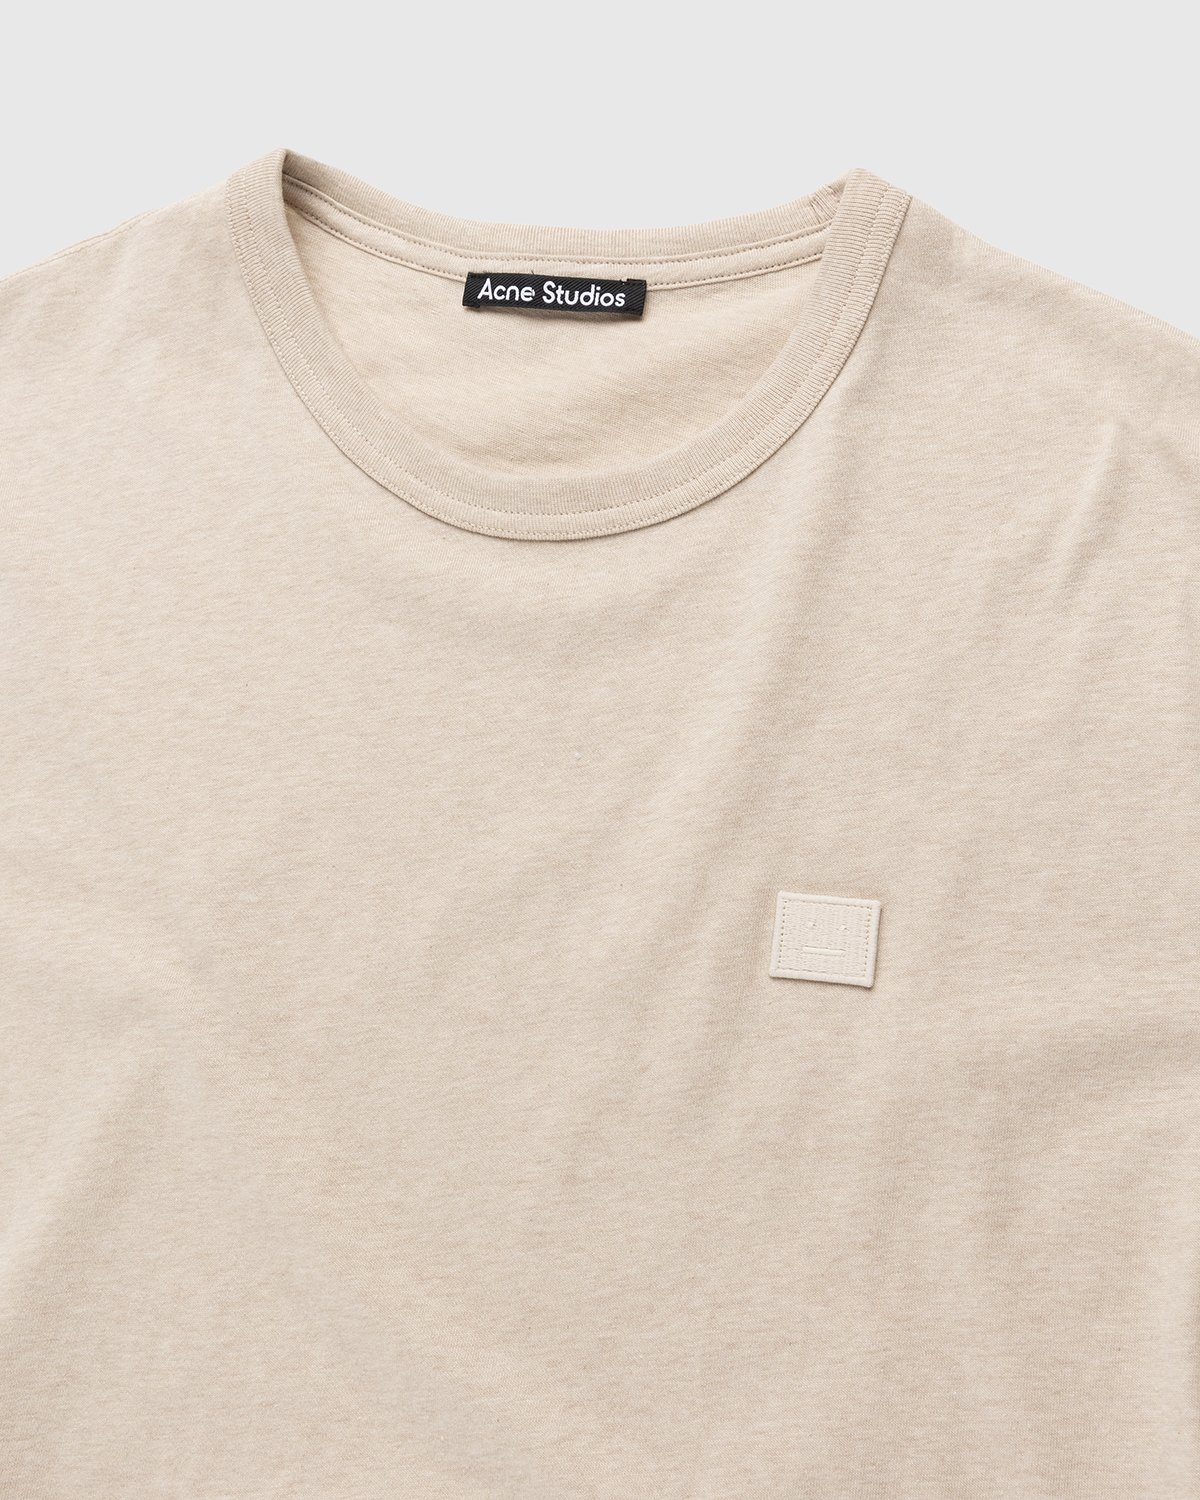 Acne Studios - Relaxed Fit T-Shirt Oatmeal Melange - Clothing - Beige - Image 3